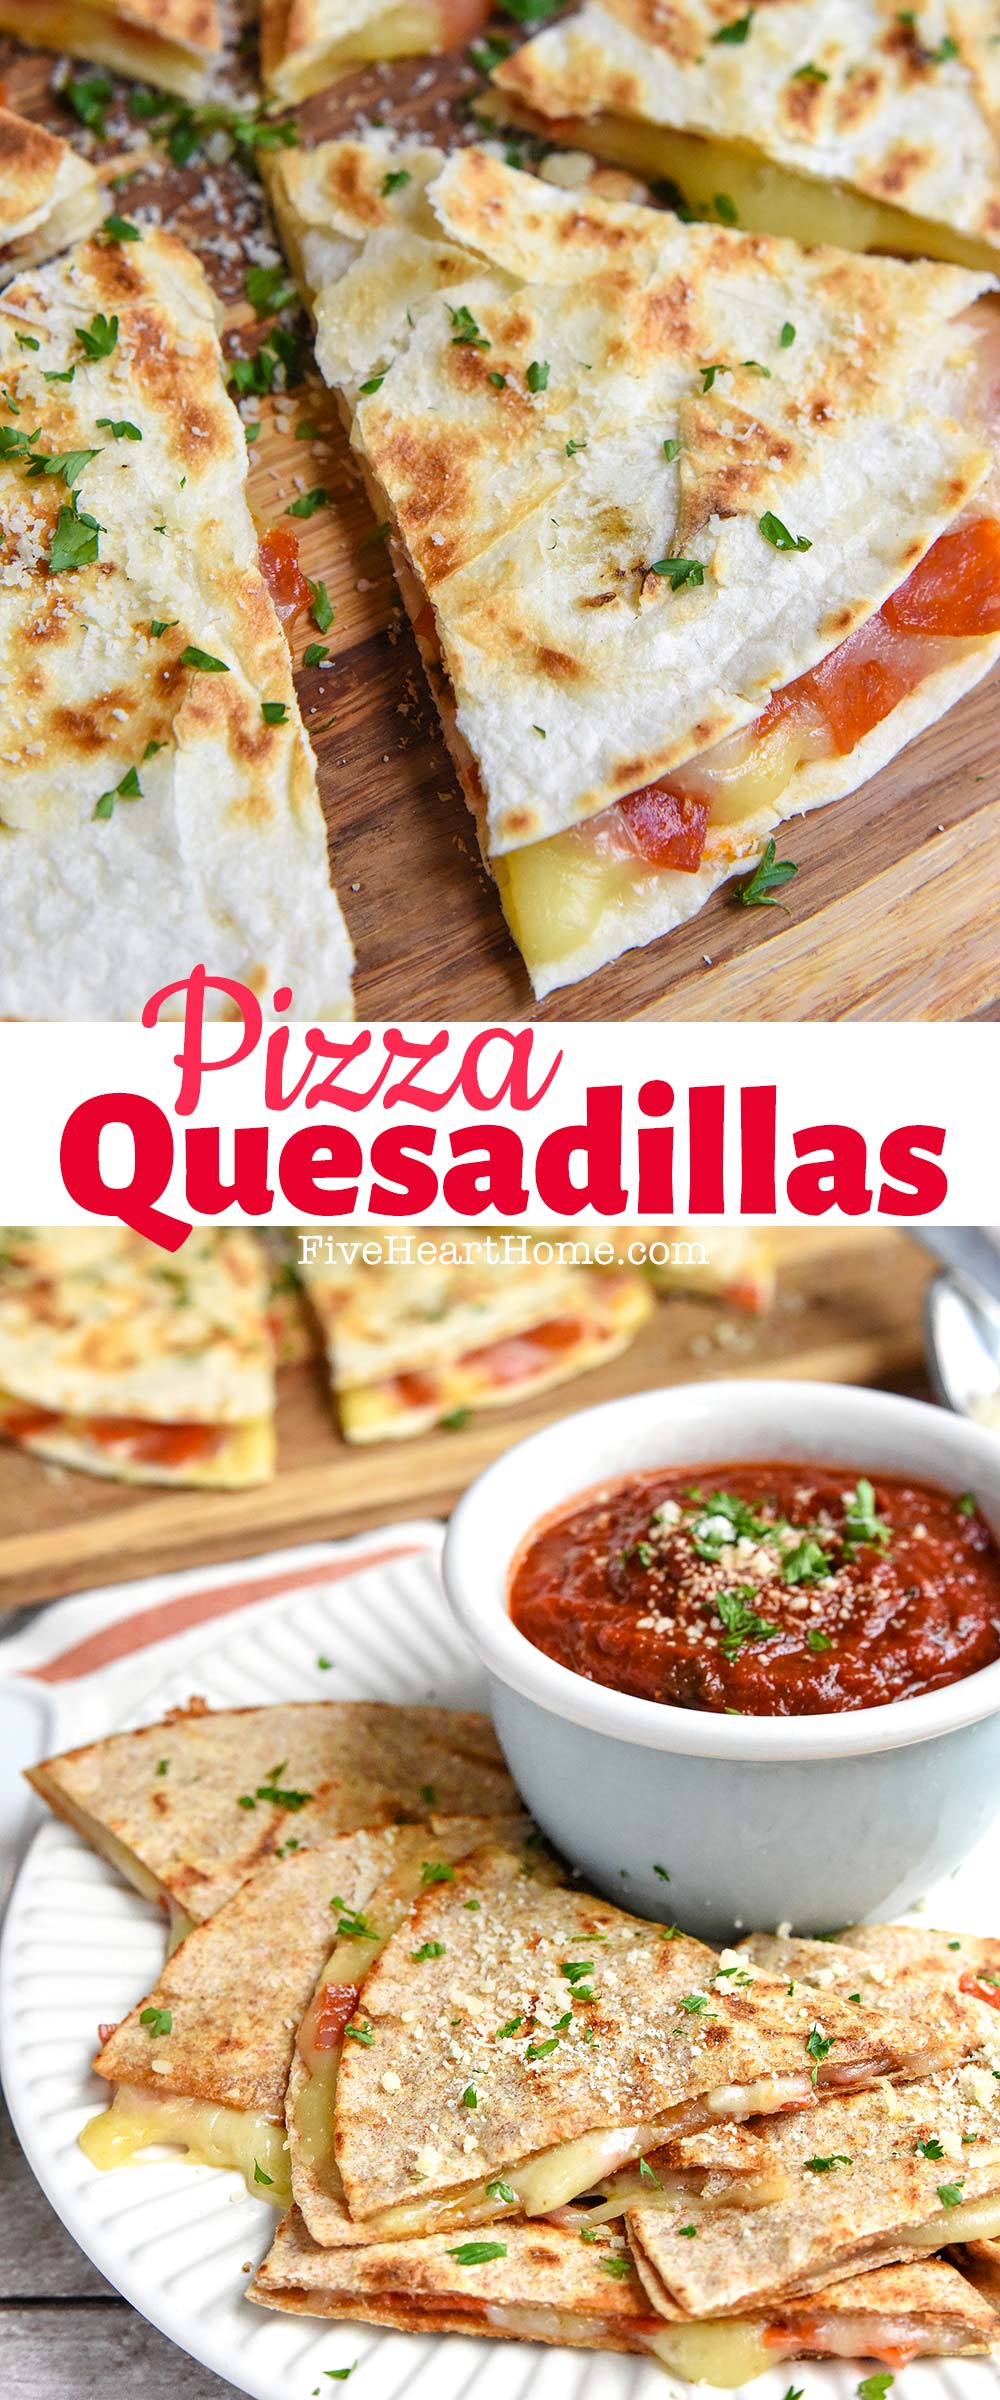 Cheesy, melty Pizza Quesadillas (or Pizzadillas) are stuffed with mozzarella and pepperoni and dipped in a flavorful herb-infused, homemade pizza sauce for a fun, quick, and easy lunch idea! | FiveHeartHome.com via @fivehearthome